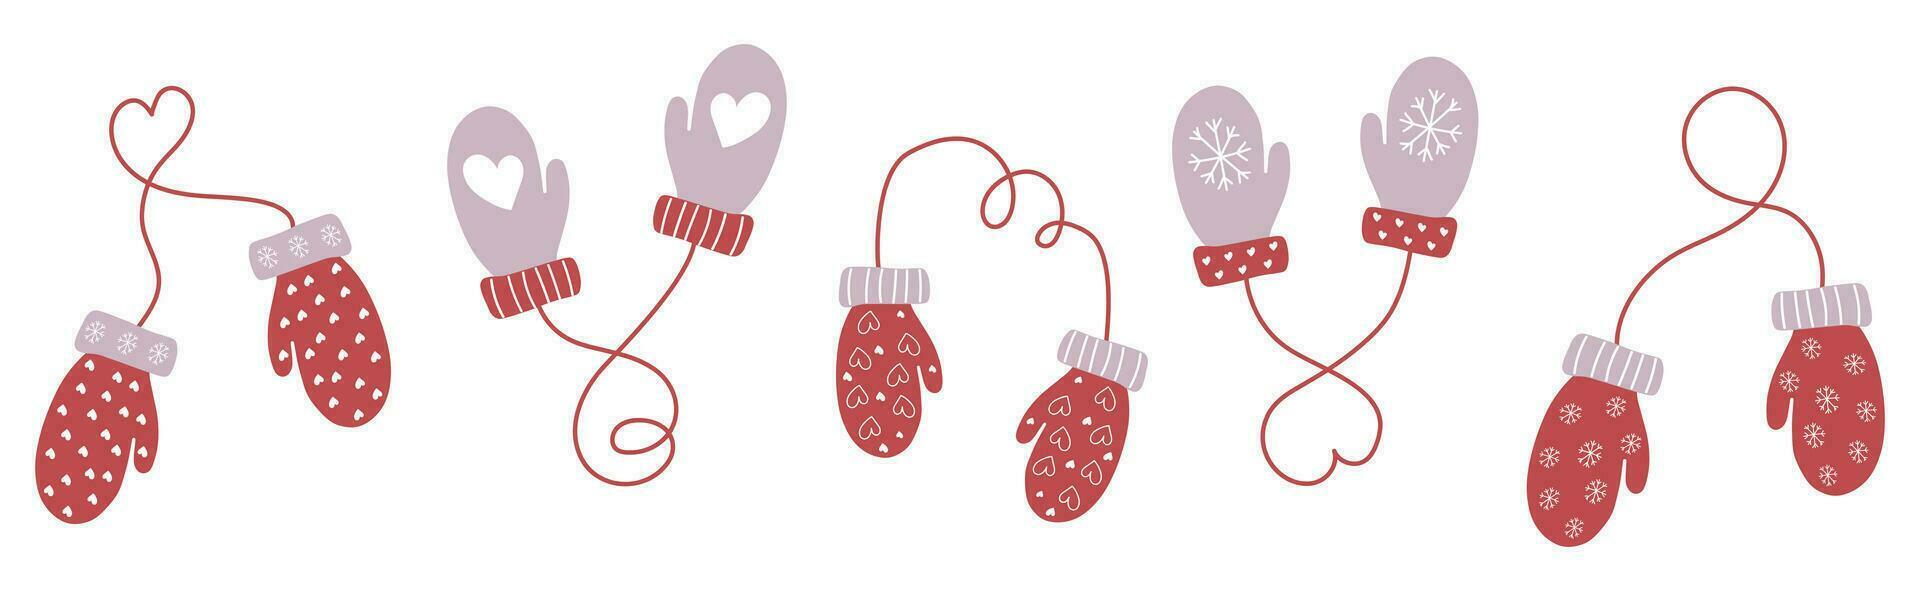 Set of mittens on a string of red and purple colors with a winter ornament. Cute mittens for kids or adults vector